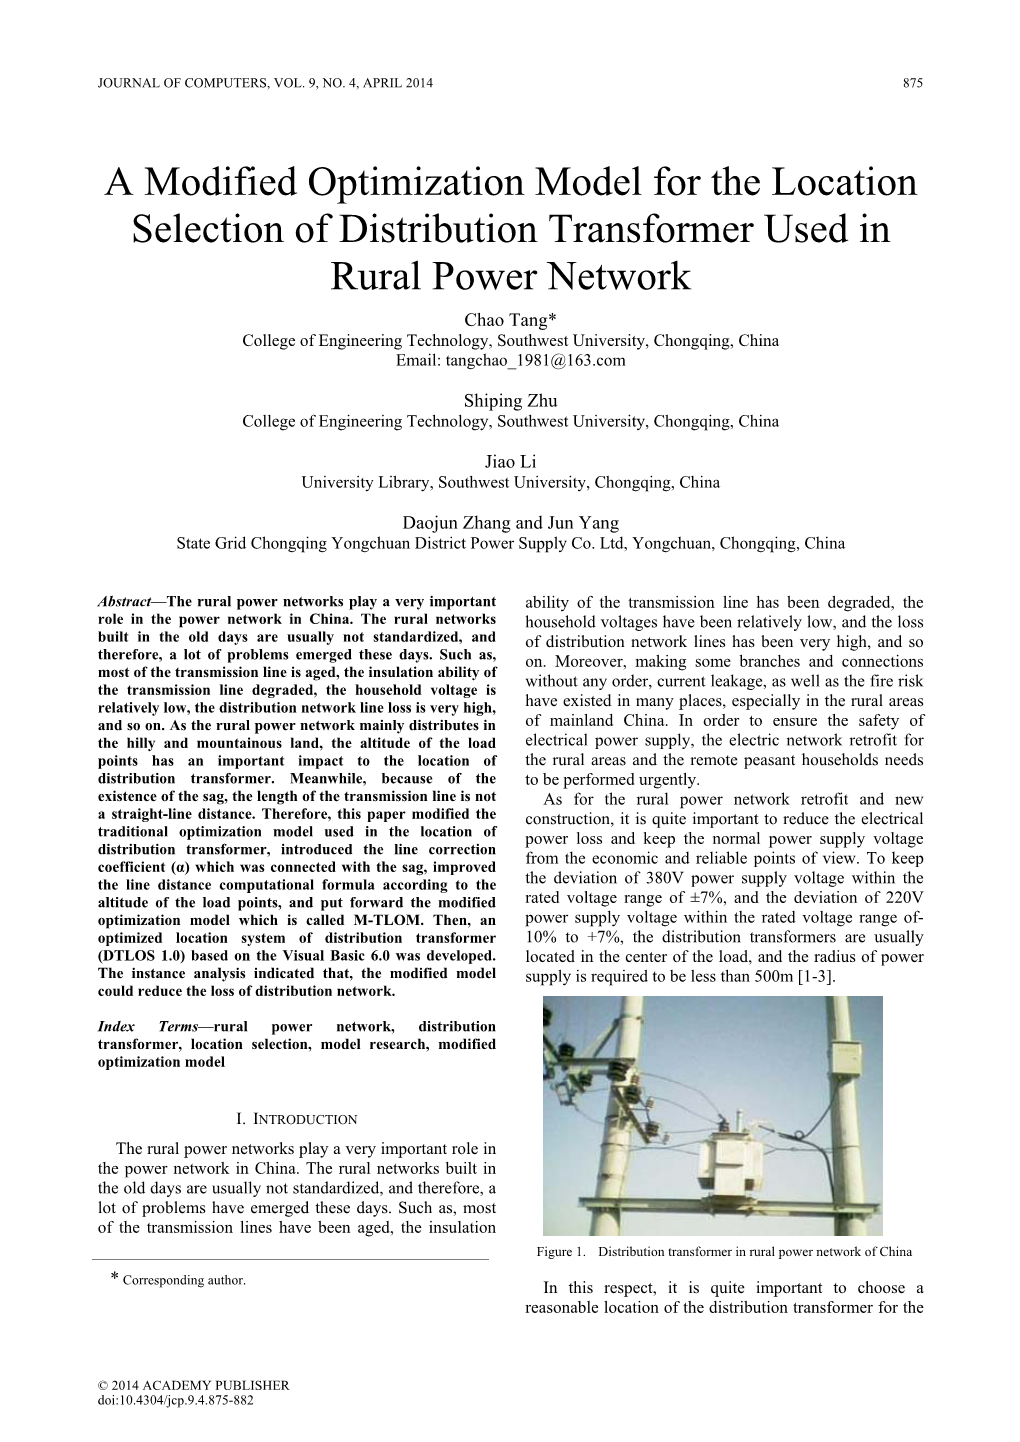 A Modified Optimization Model for the Location Selection of Distribution Transformer Used in Rural Power Network